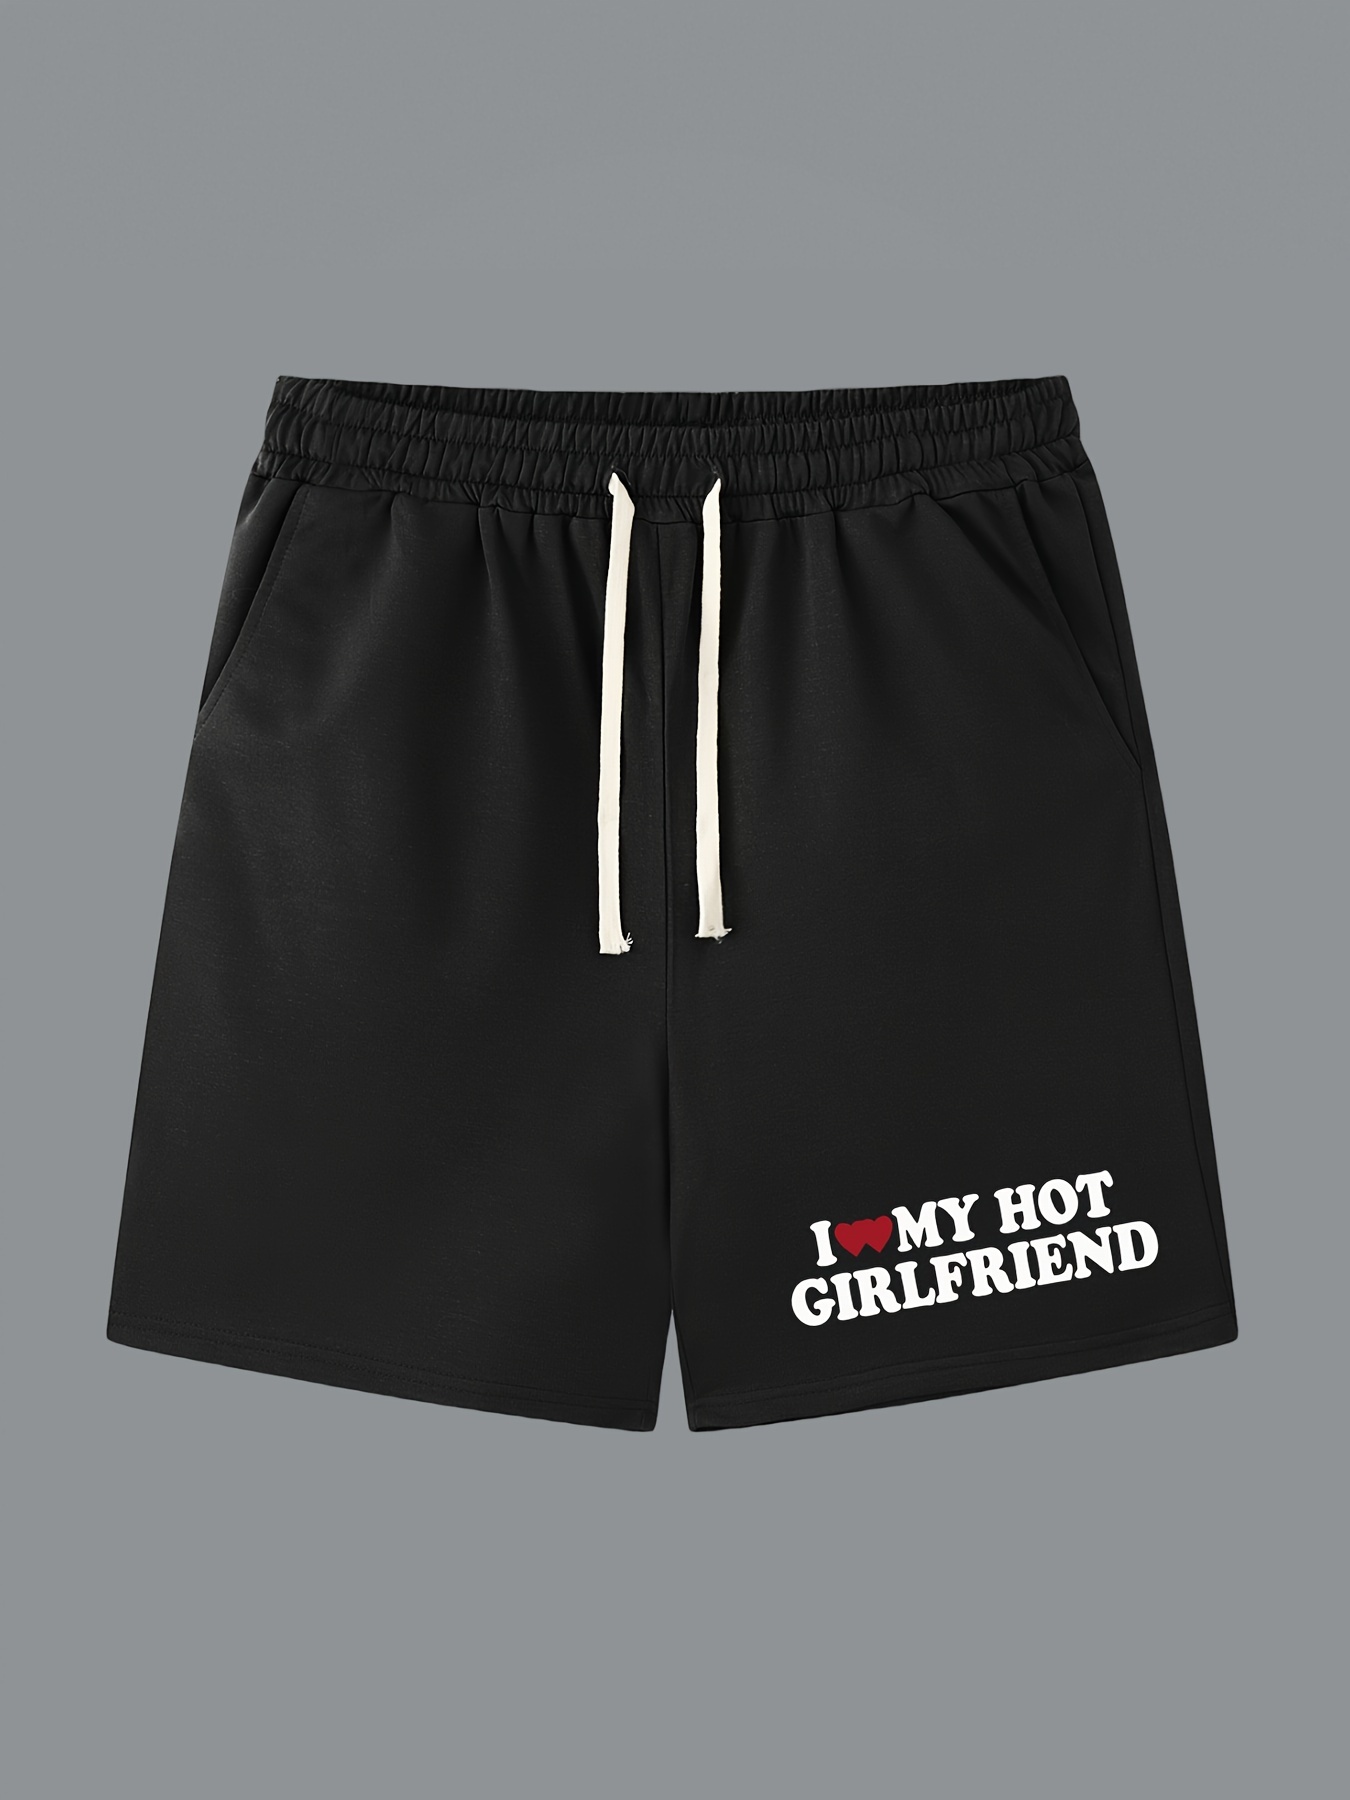 I Love-My-GF-Girlfriend Heart Gifts for Women Men's Workout Running Shorts  Lightweight Athletic Gym Shorts with Liner White at  Men's Clothing  store